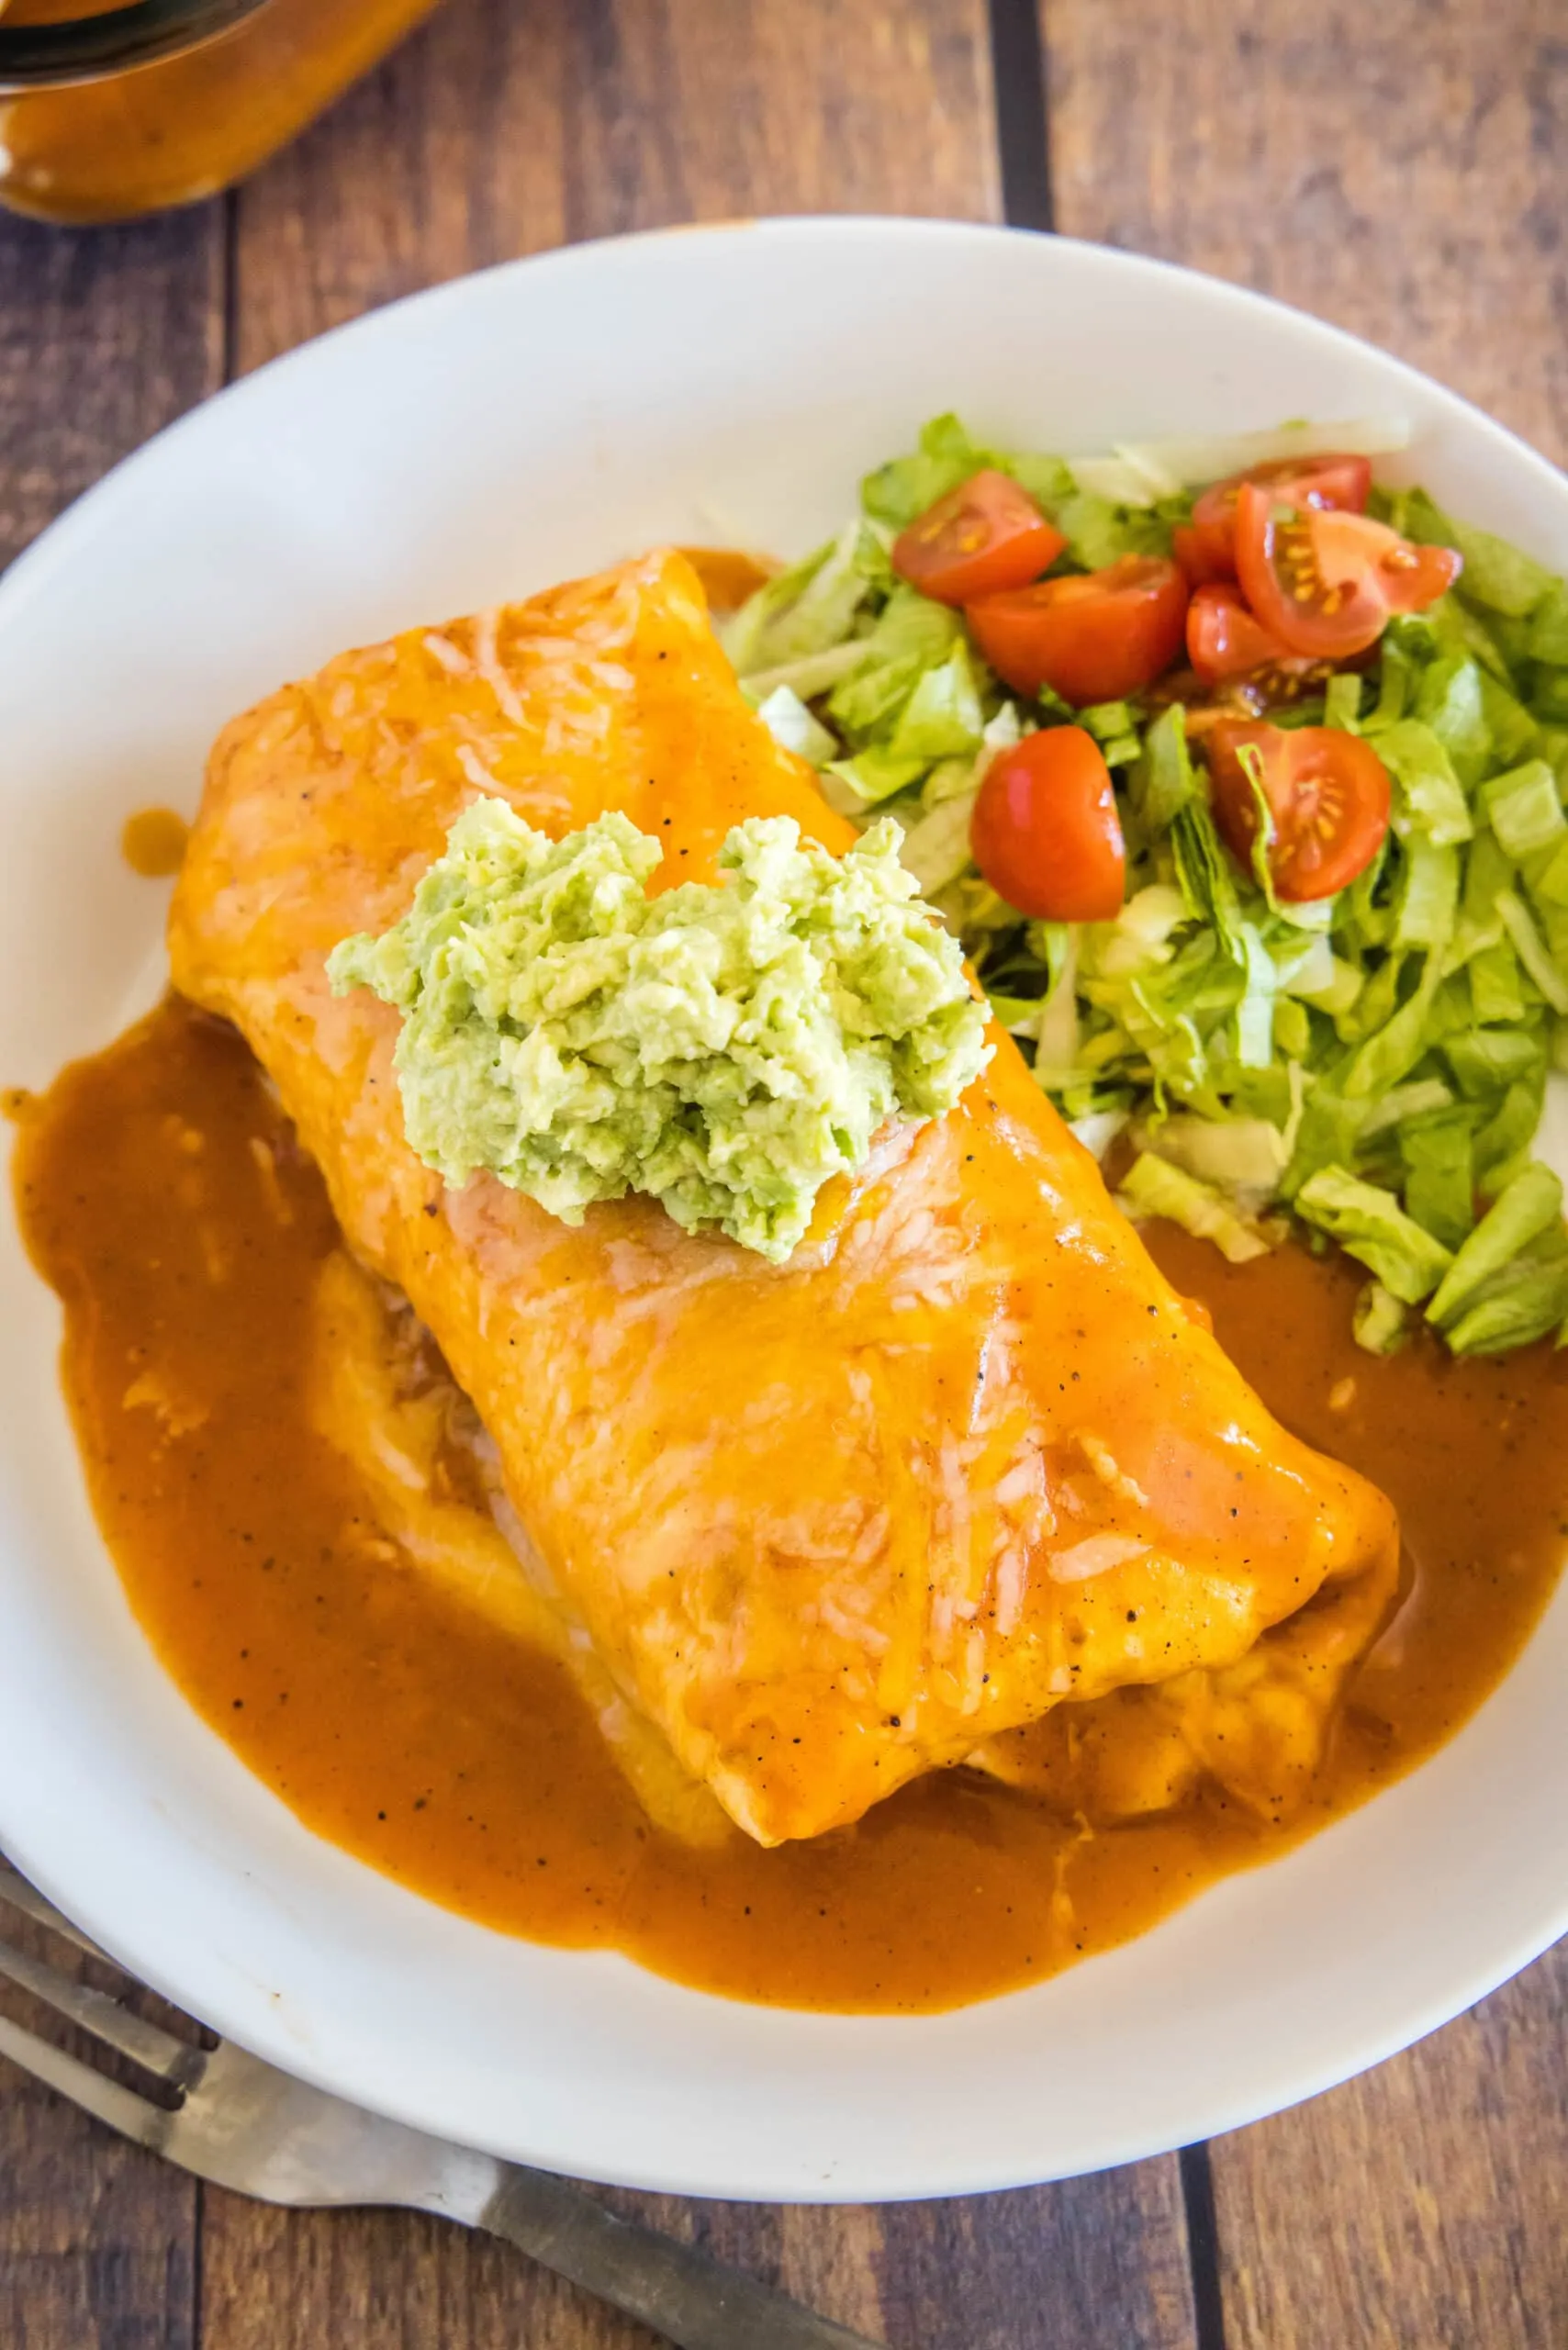 Overhead view of a wet burrito topped with guacamole, on a plate with lettuce and tomatoes, next to a fork